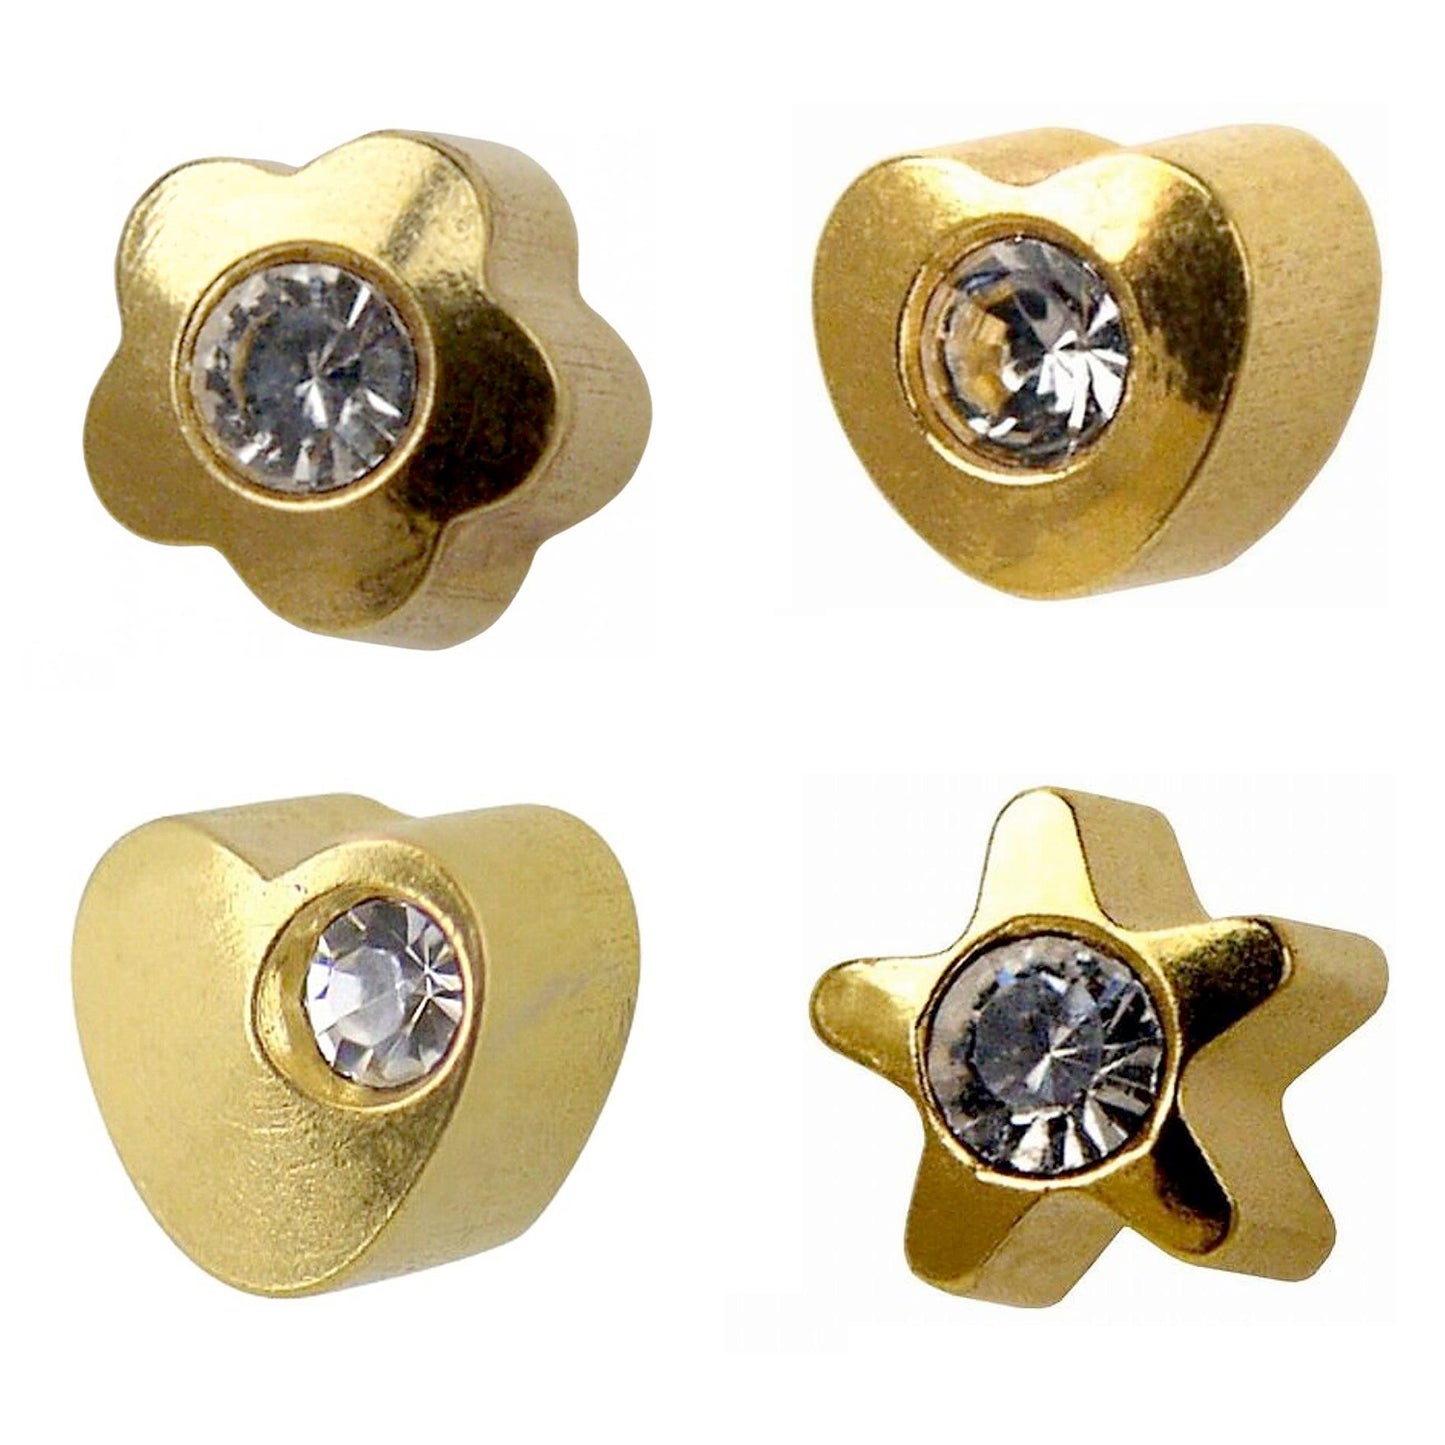 STUDEX Regular Gold Plated Shapes with Crystal Heart, Star, Flower Lite Offset